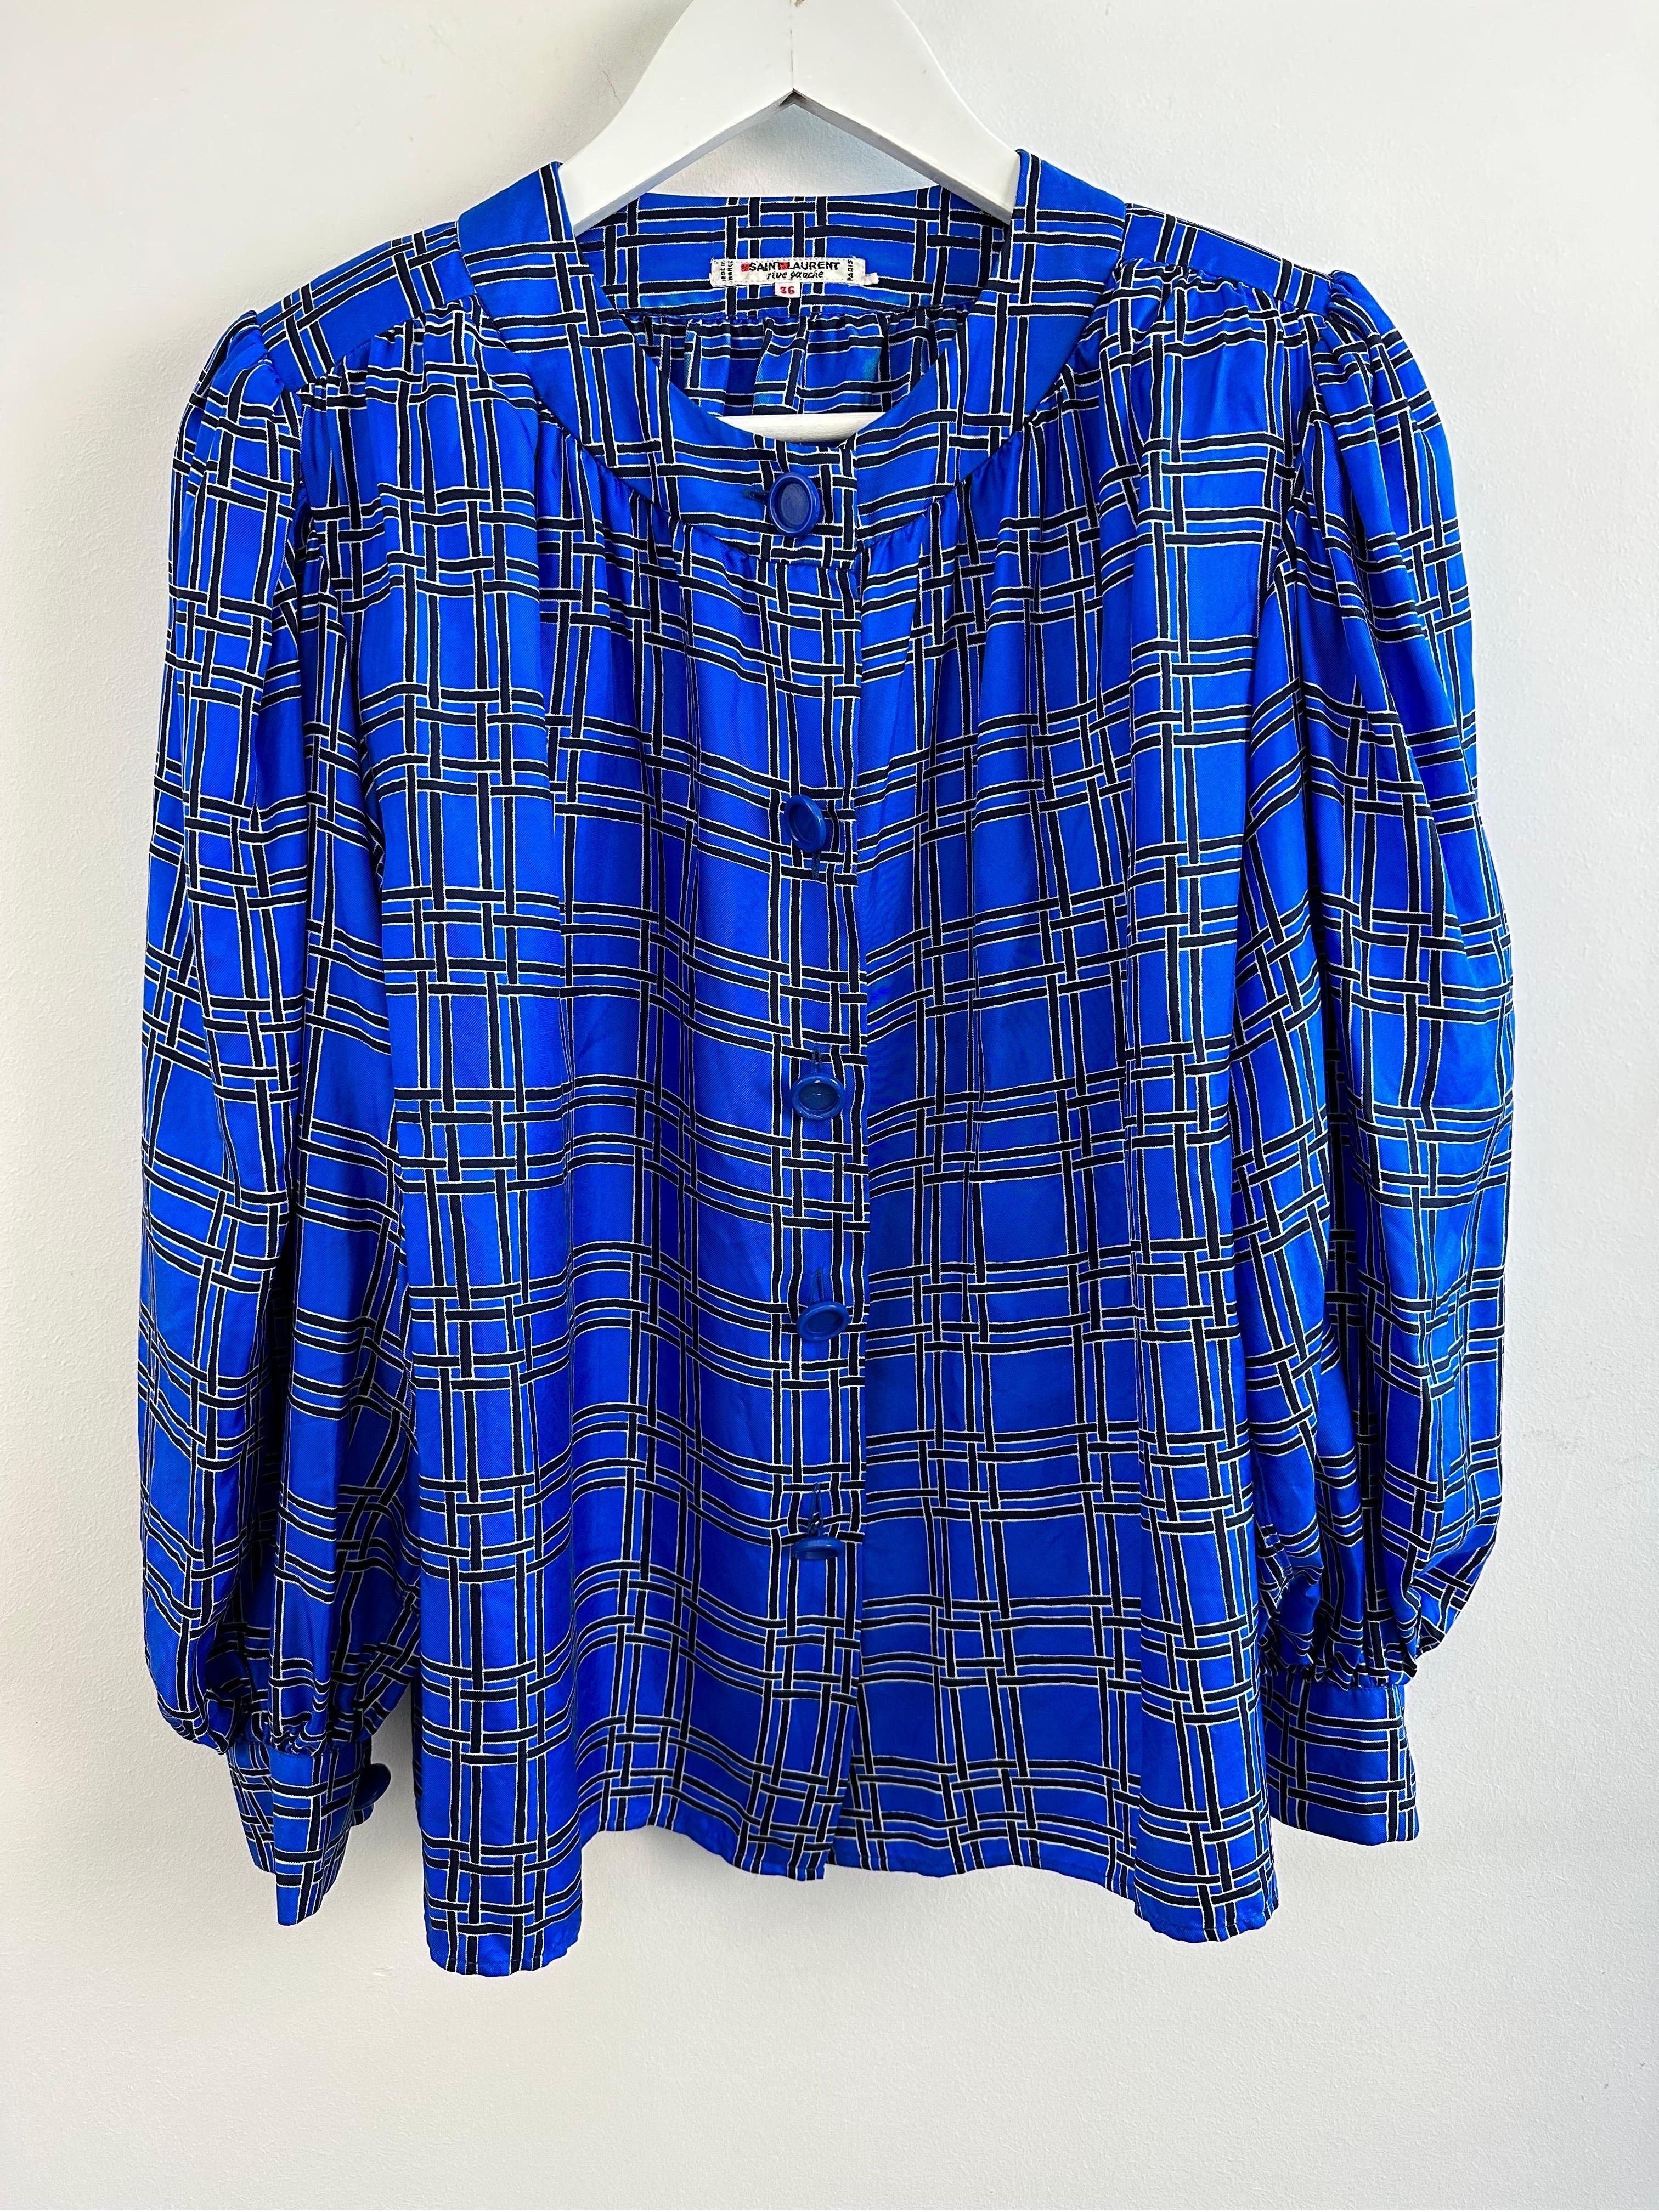 YSL Yves saint Laurent royal blue silk blouse from the 1970s For Sale 4